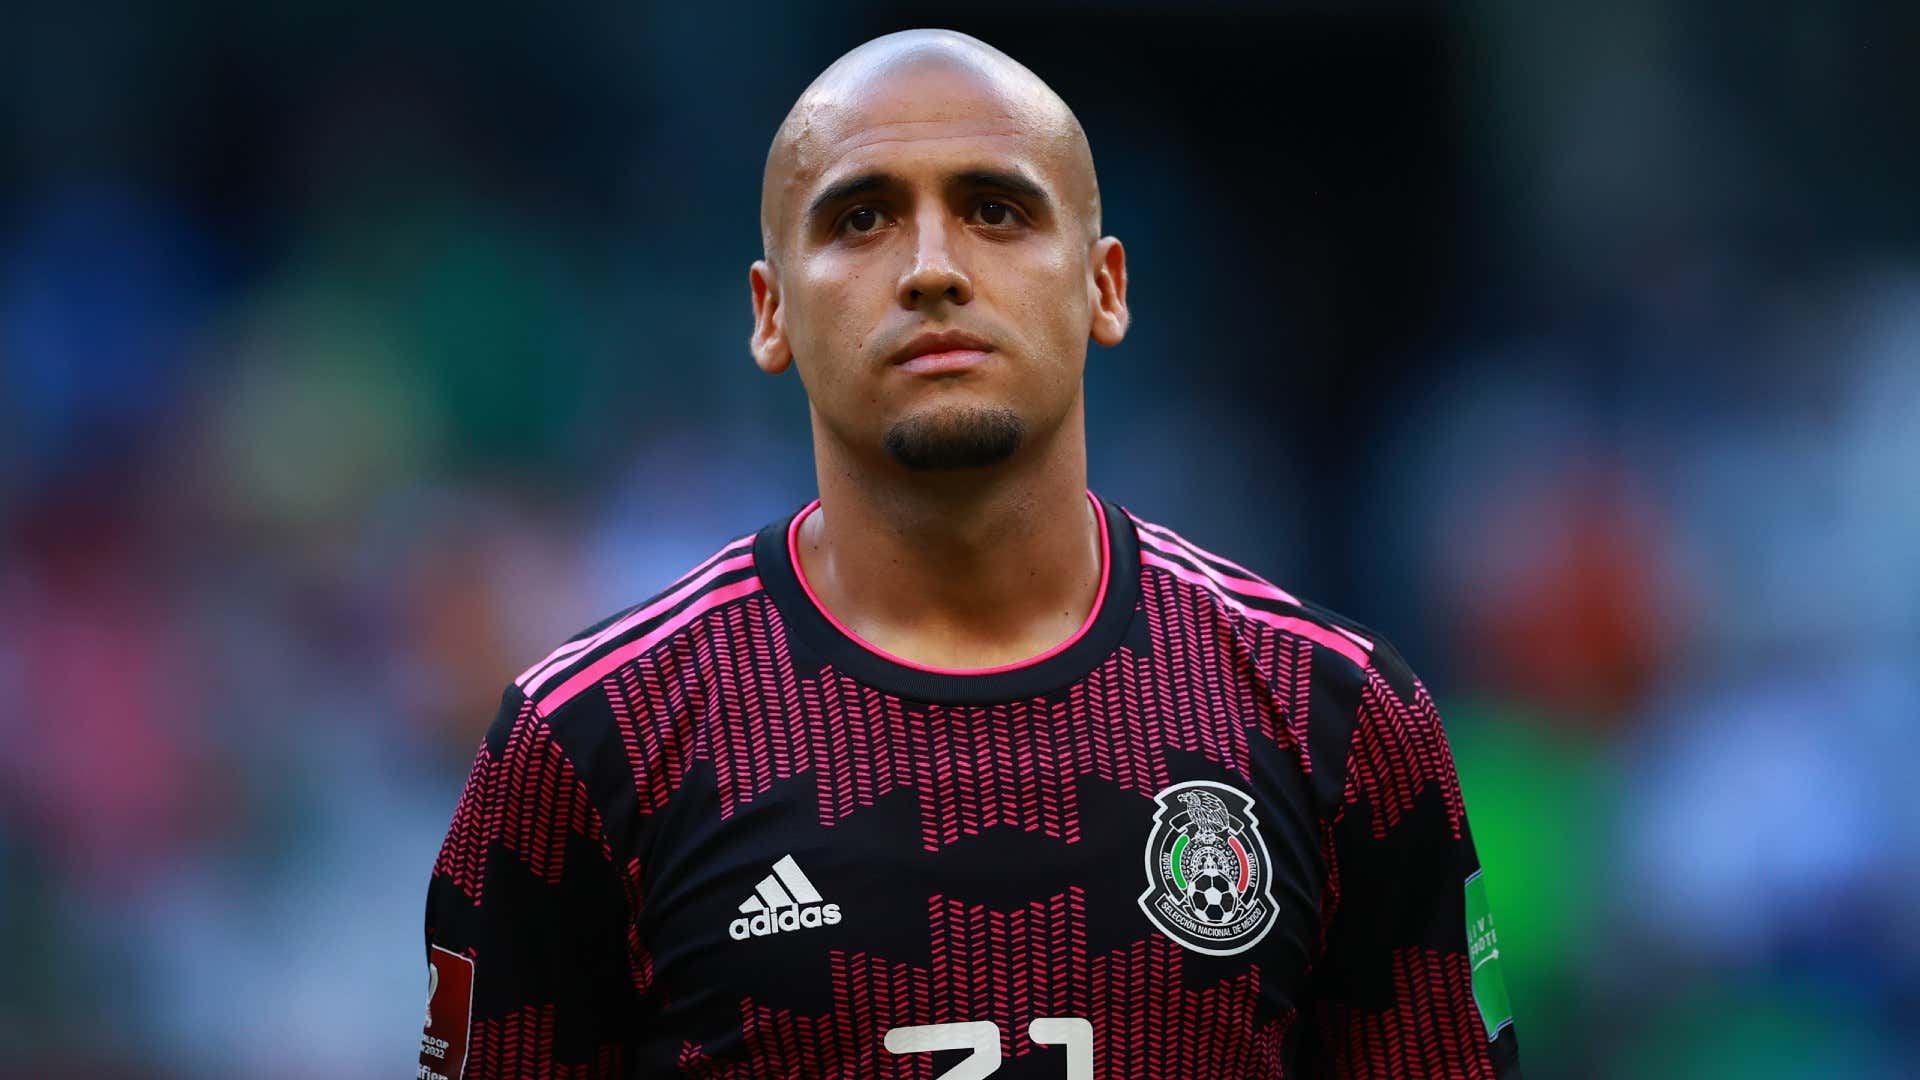 Mexico star Rodriguez reveals death threats made to wife after World Cup qualifying defeat to USMNT